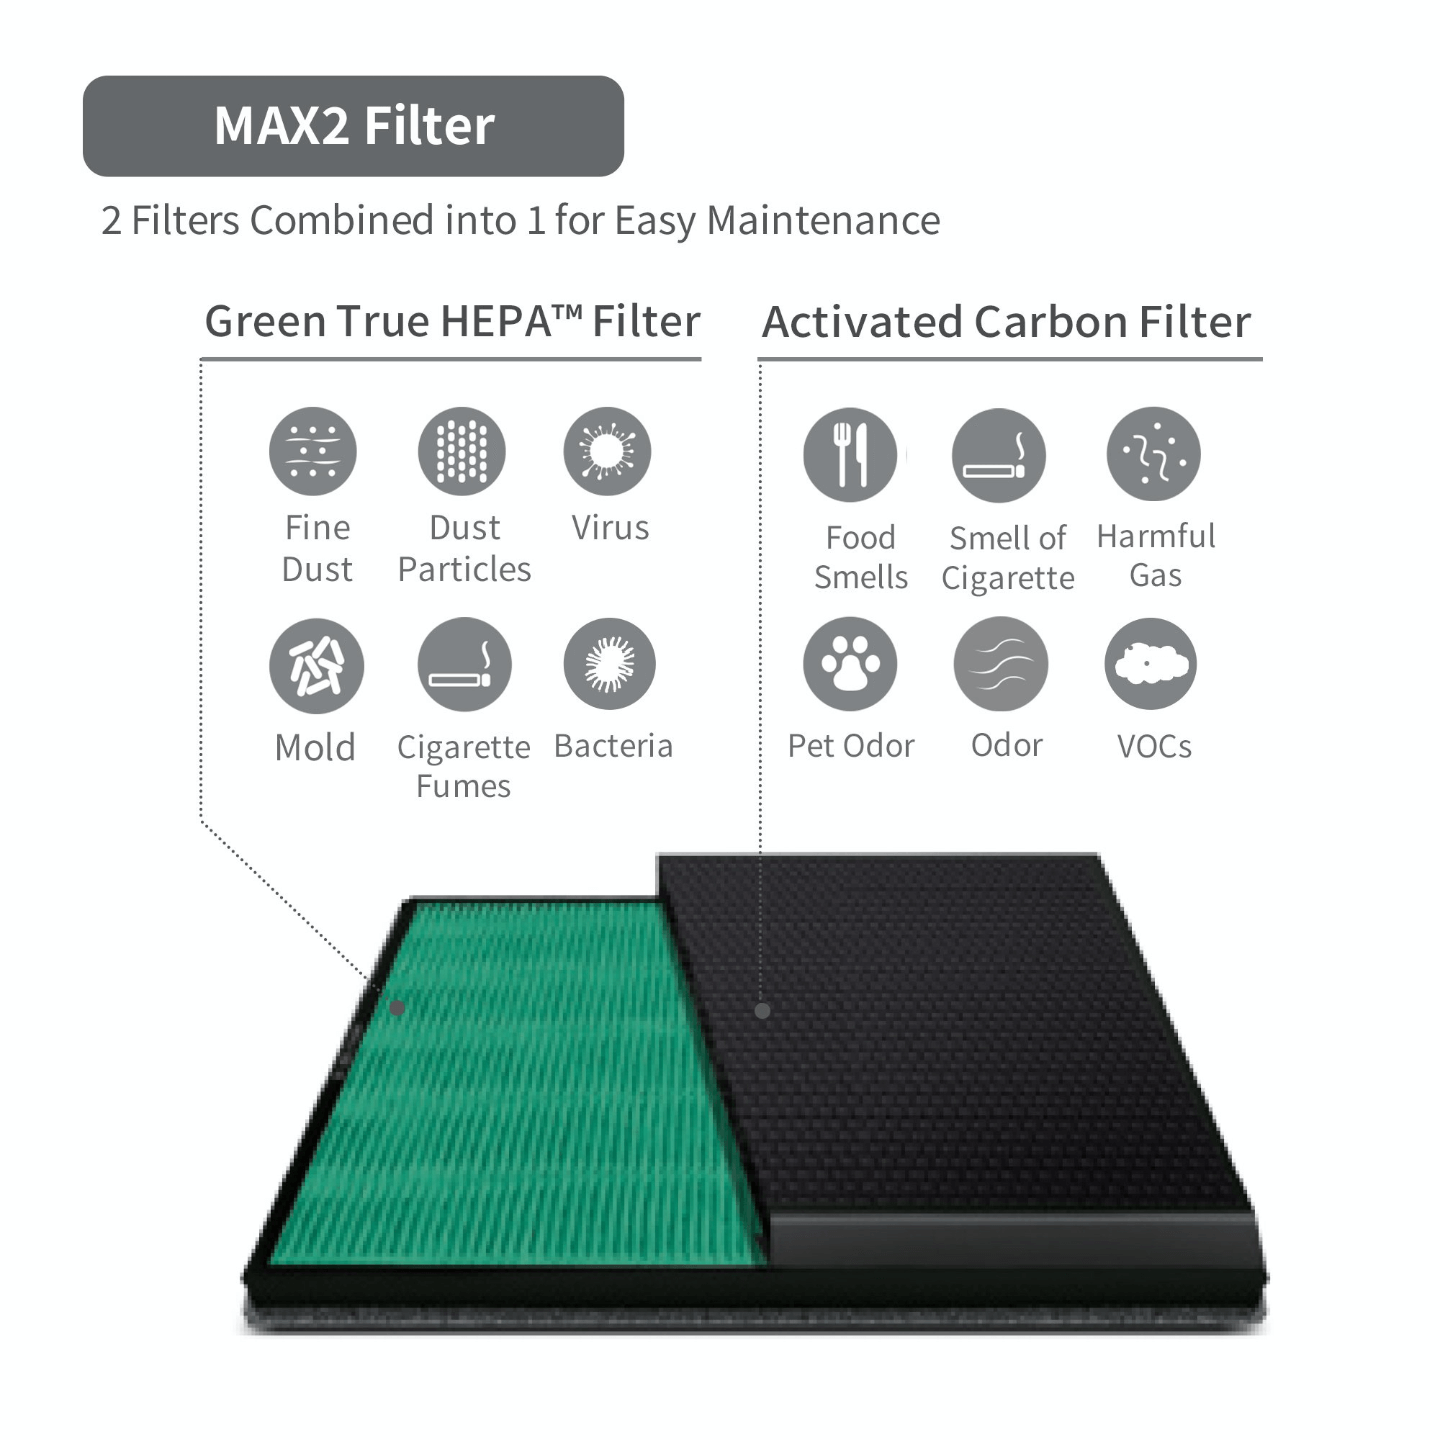 Coway Airmega 400 Max2 Filter Set showing hepa filter and activated carbon filter properties